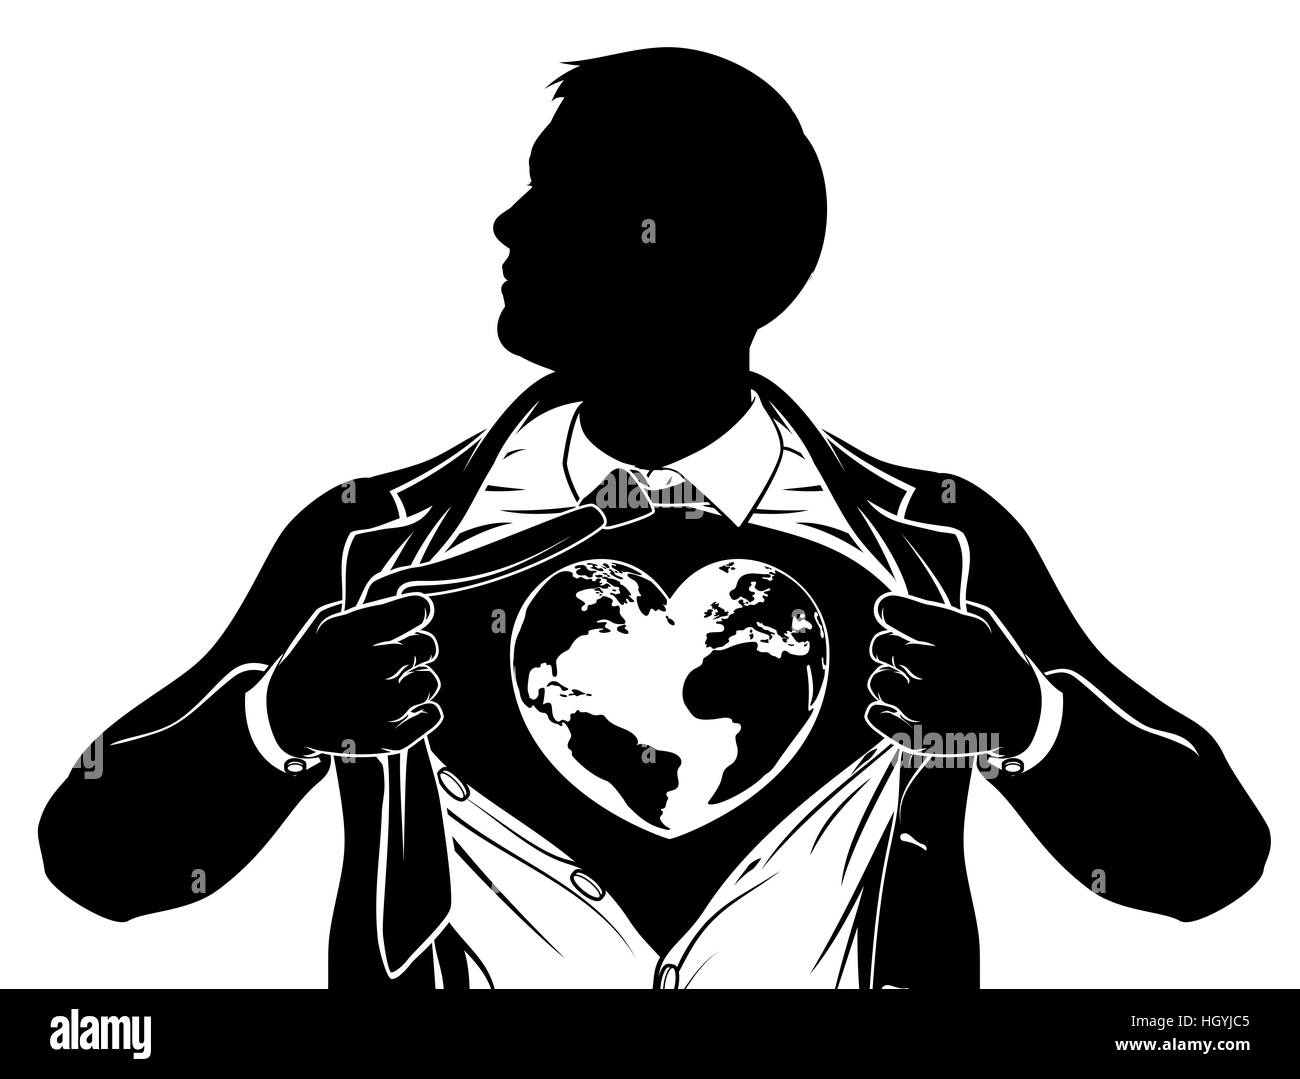 A superhero business man tearing his shirt showing the chest of his costume underneath with a heart shaped world earth globe Stock Photo